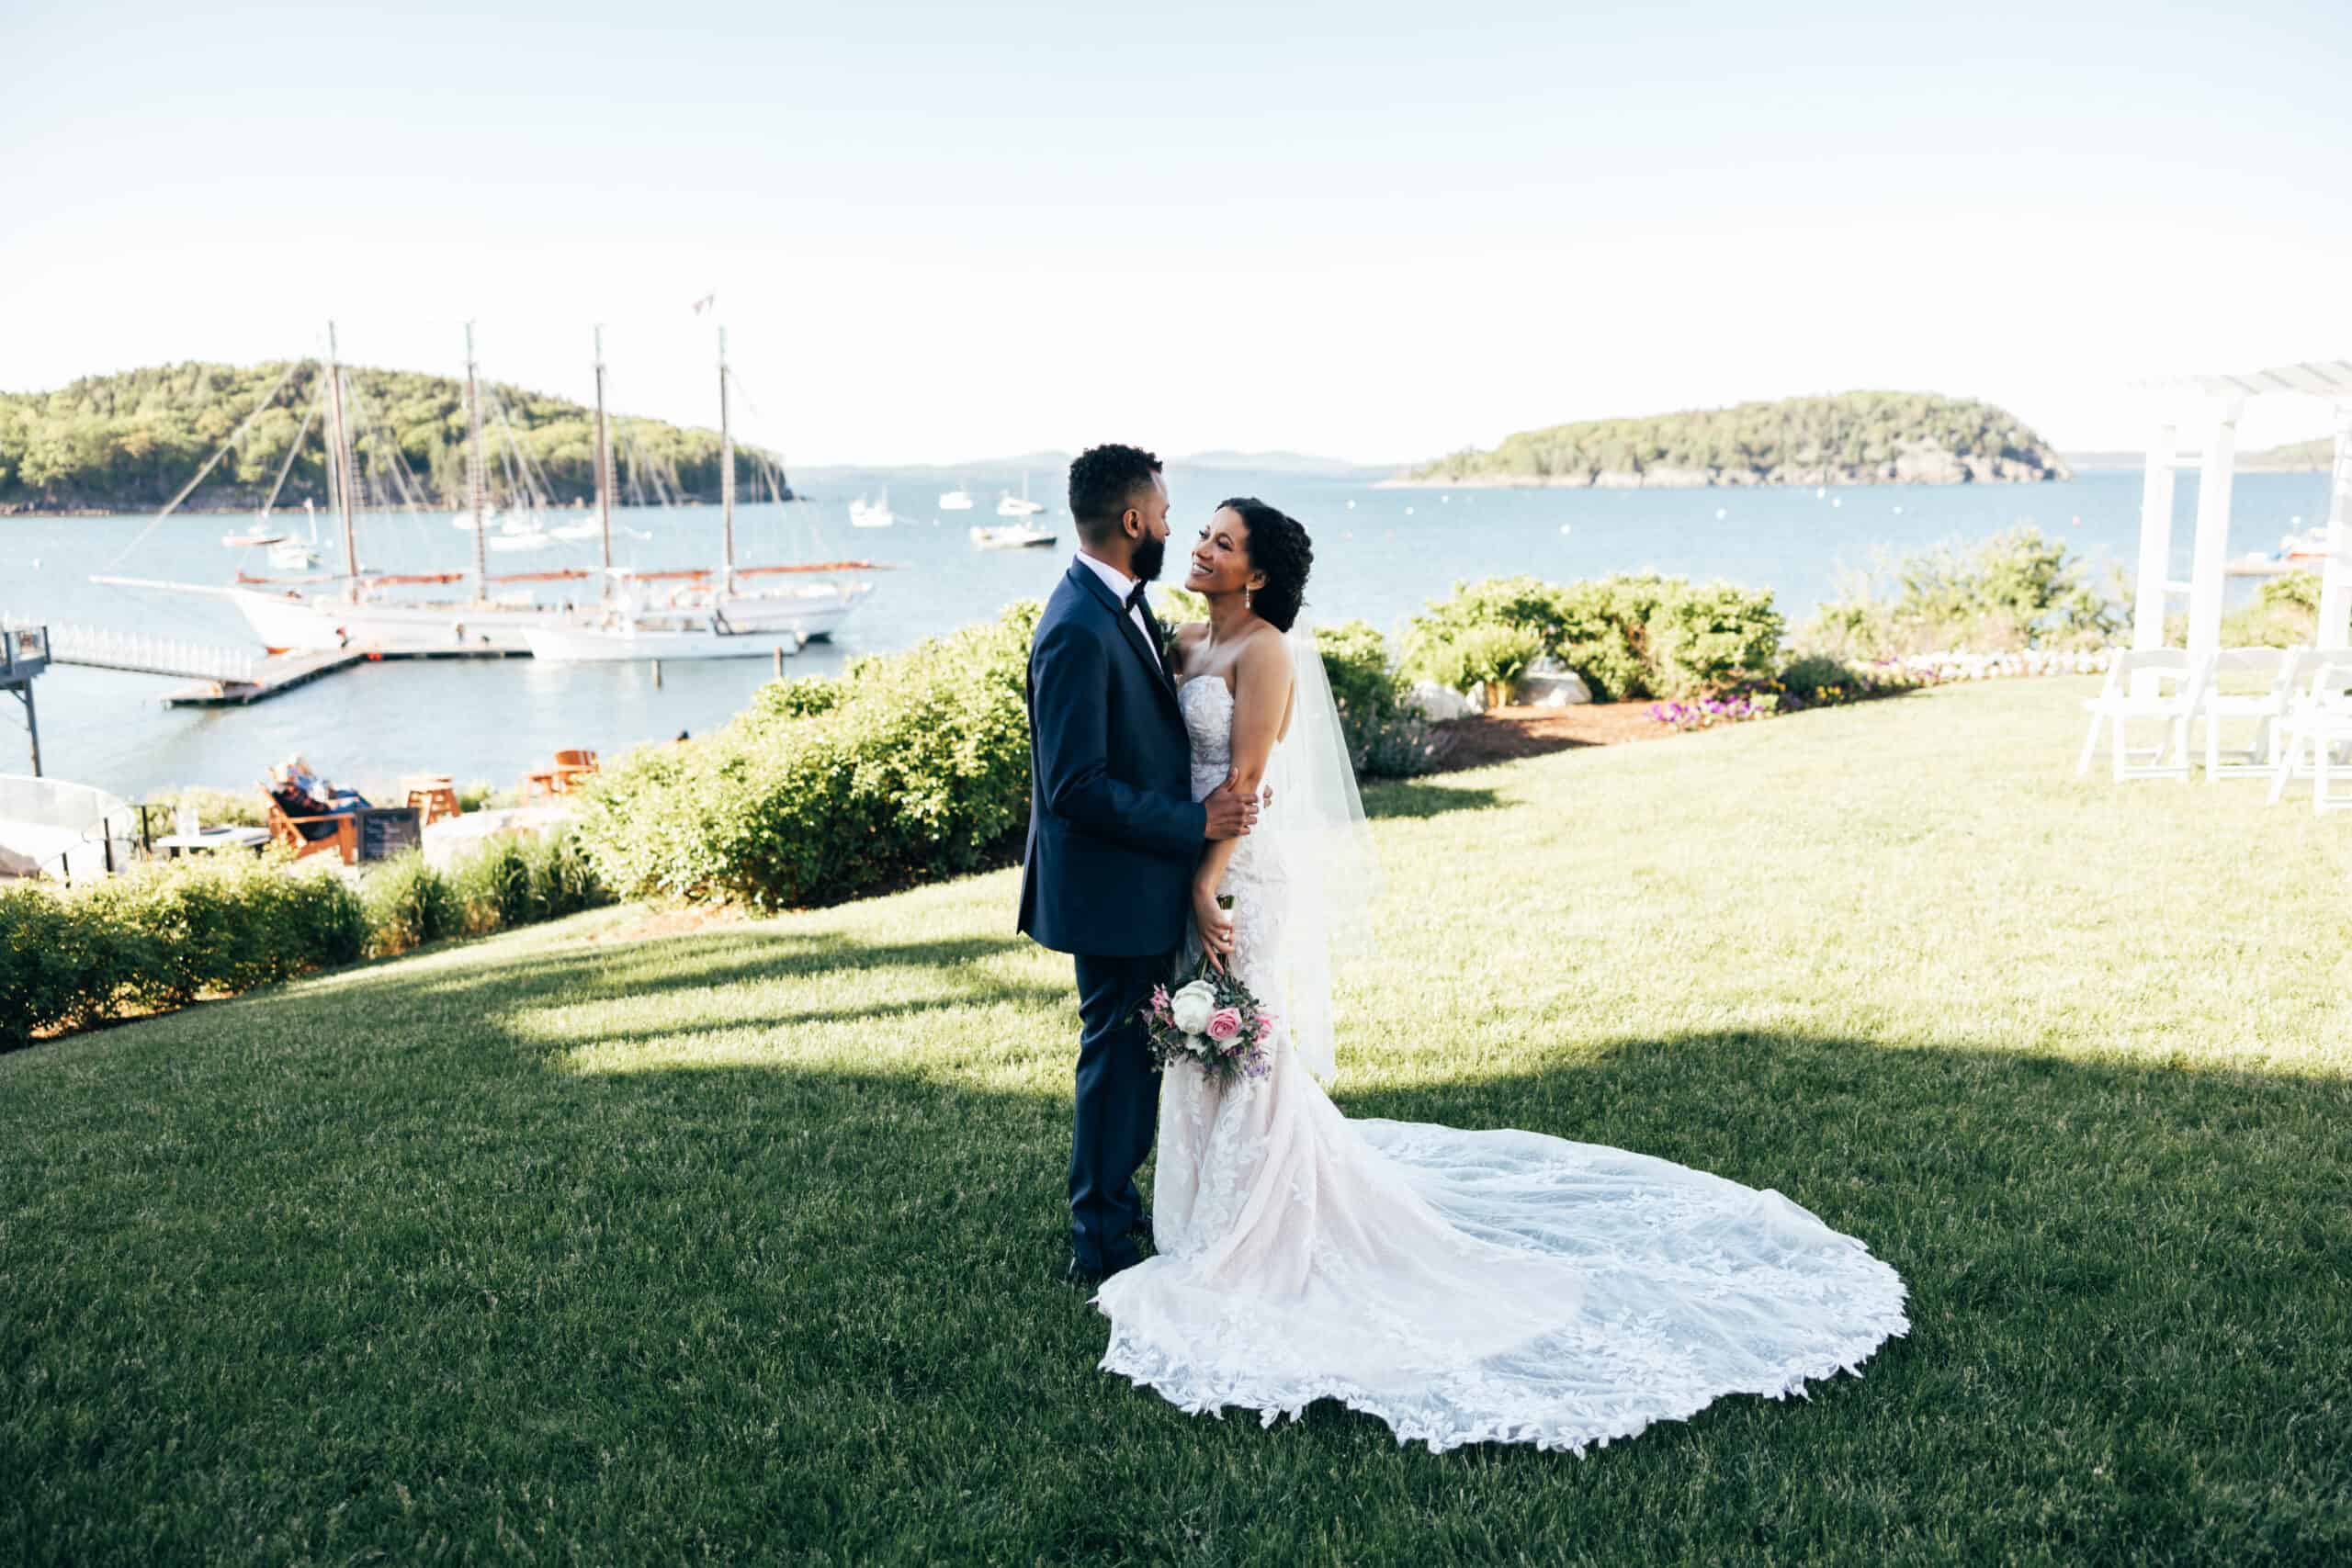 The Unique Wedding Venues In Maine You Should Know About